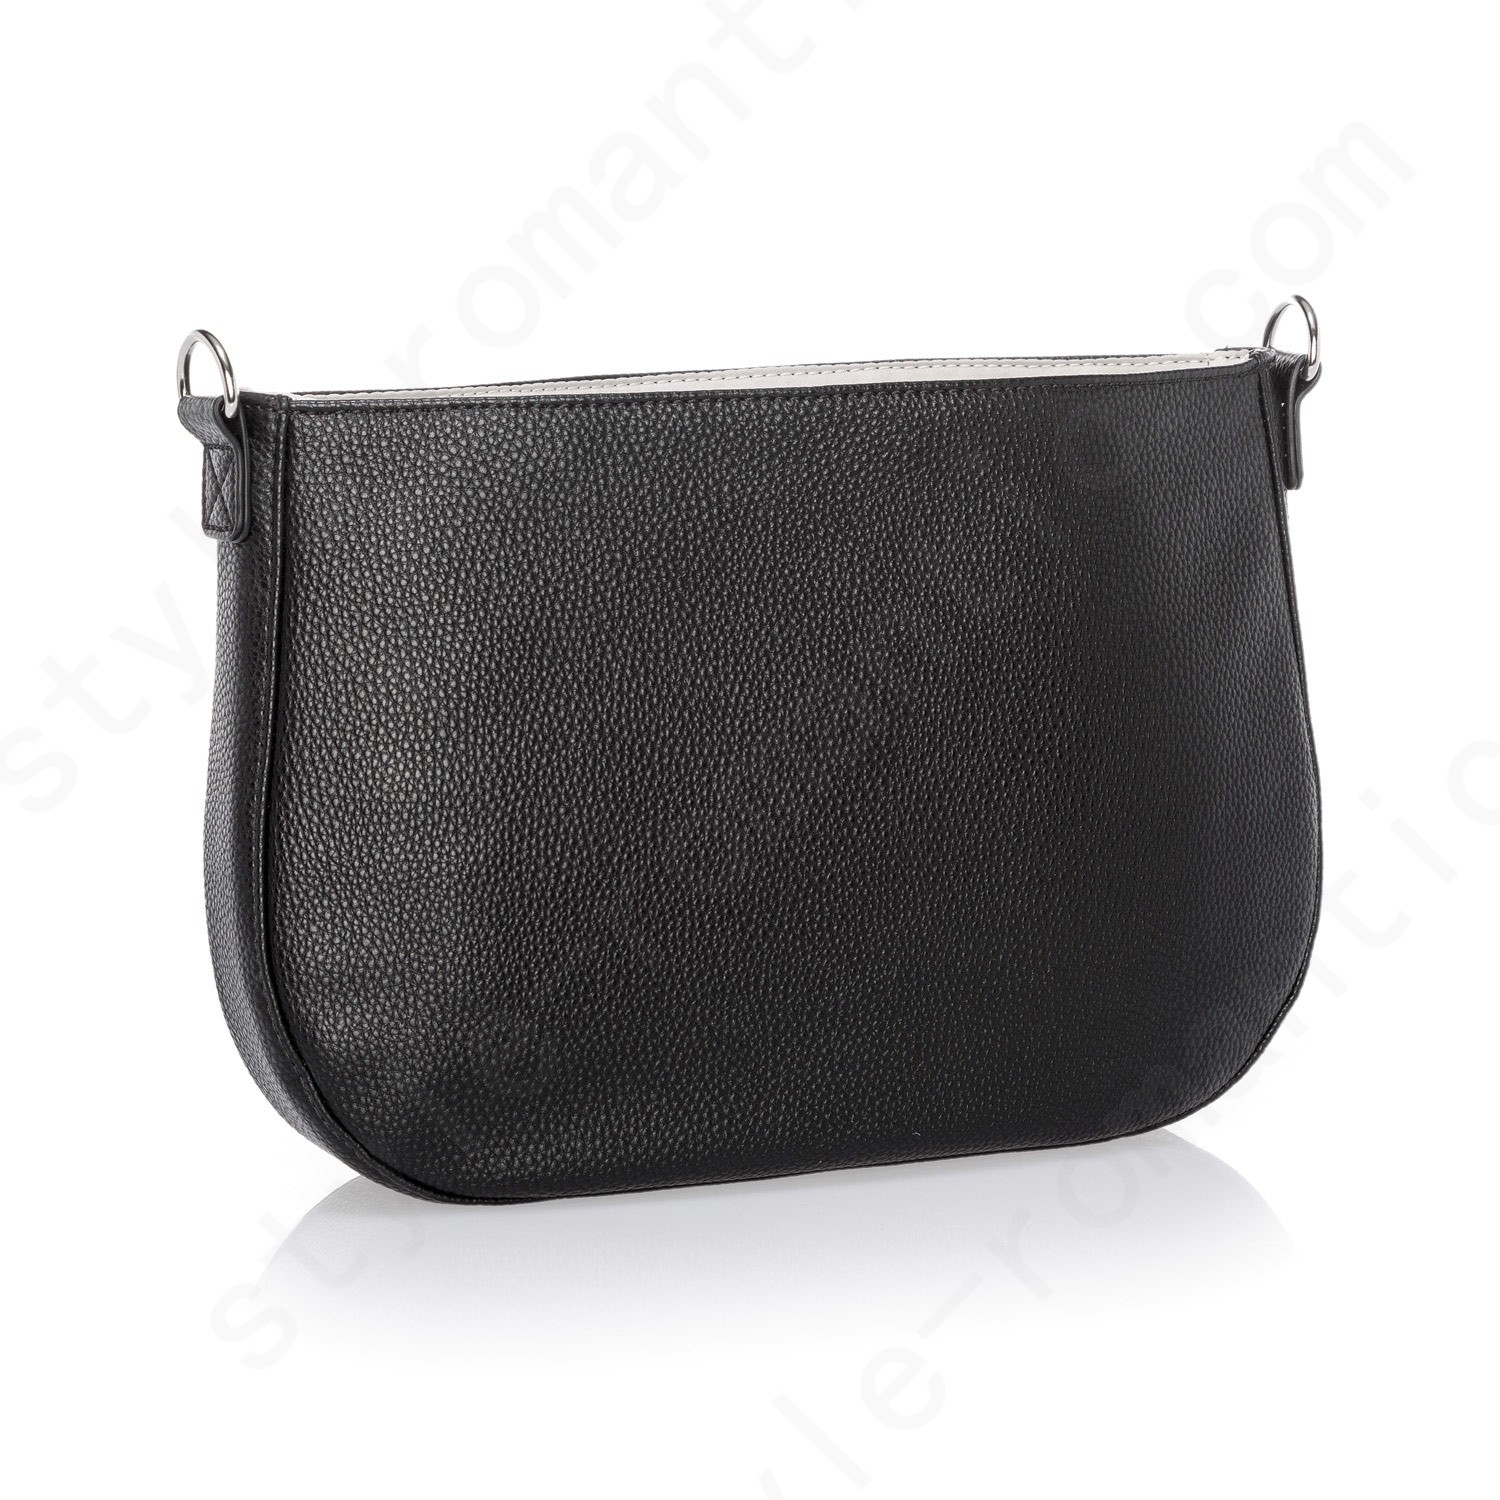 Thirty-One Gifts Studio Thirty-One Classic Body - Black Beauty Pebble Handbags Accessories - Thirty-One Gifts Studio Thirty-One Classic Body - Black Beauty Pebble Handbags Accessories